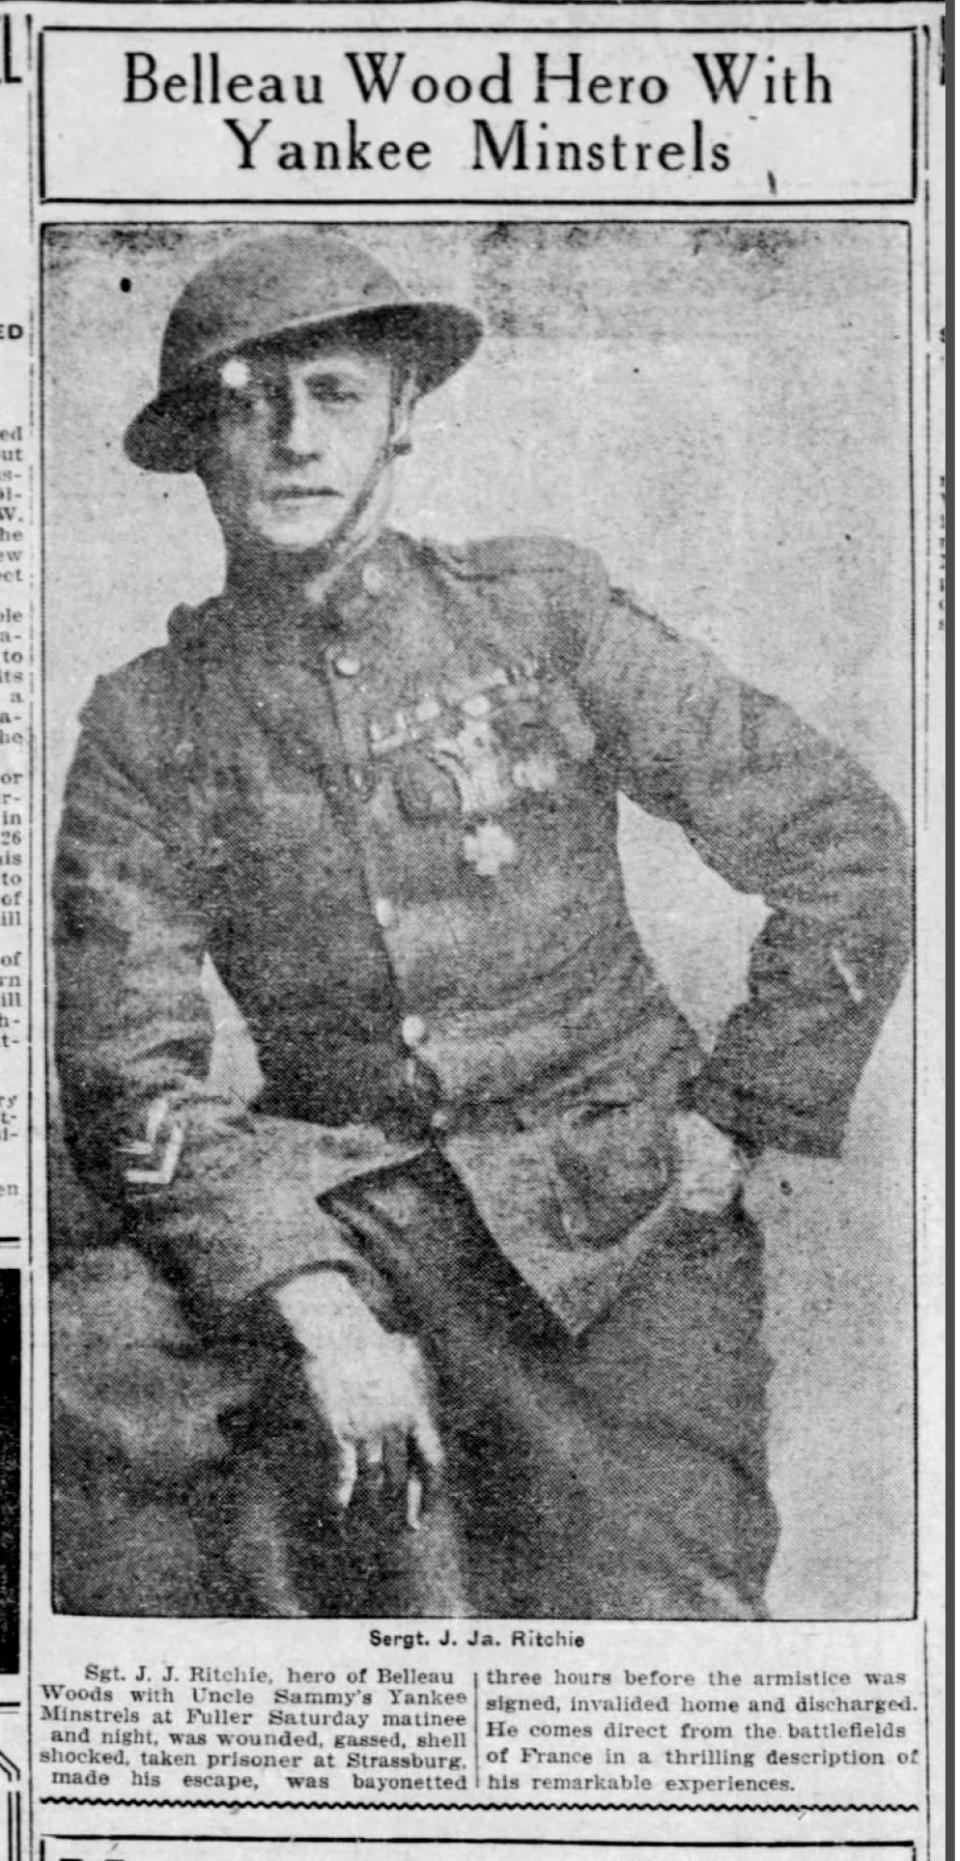 Sargent J.J. Ritchie appeared at the Cheboygan Opera House with the Yankee Minstrals, sharing his exploits in World War I. Courtesy Wisconsin State Journal